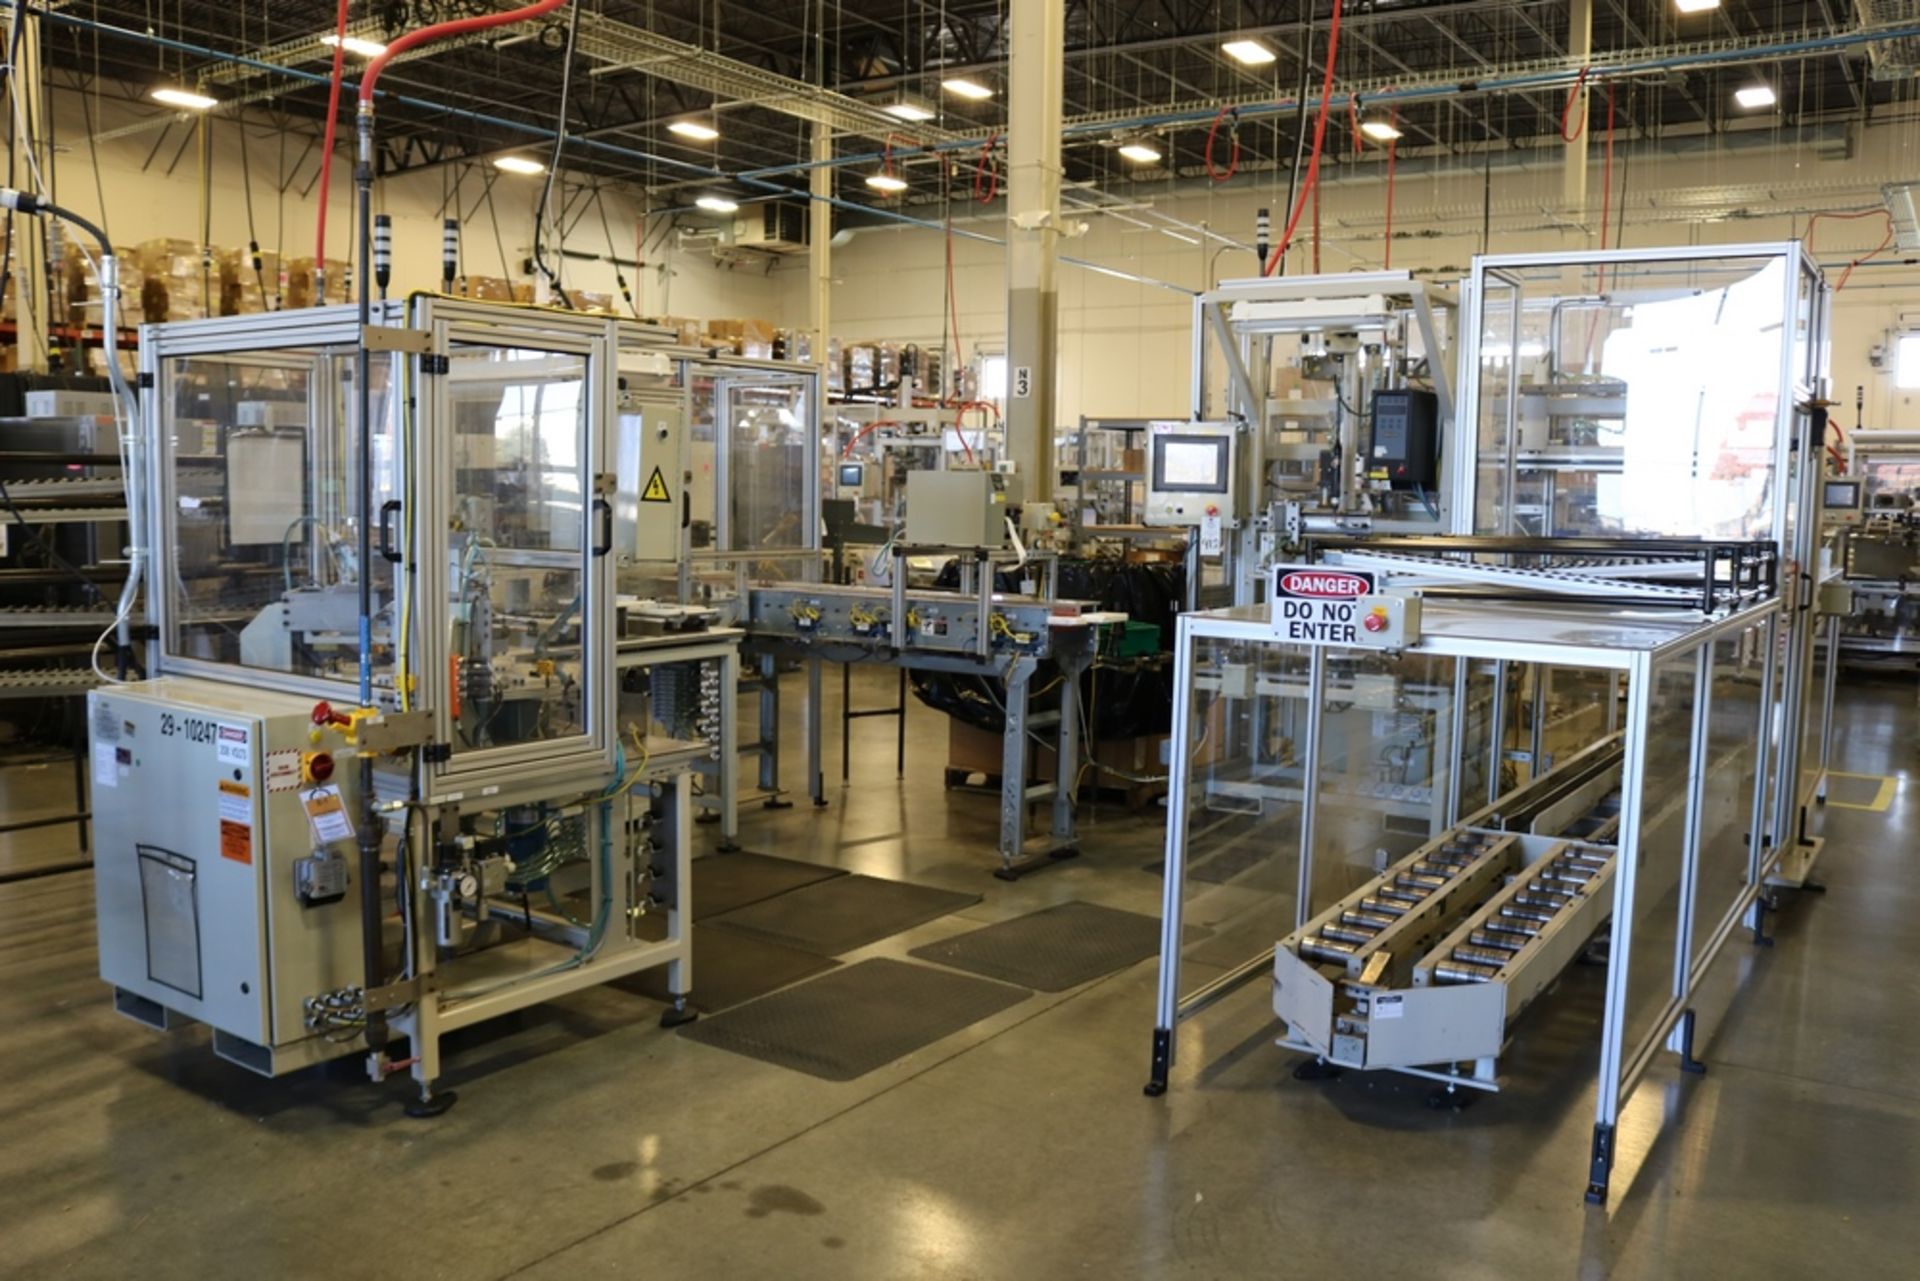 3 Station Automated Module Assembly Line Built by Pro Tech Machine for Enerdel Module Assembly